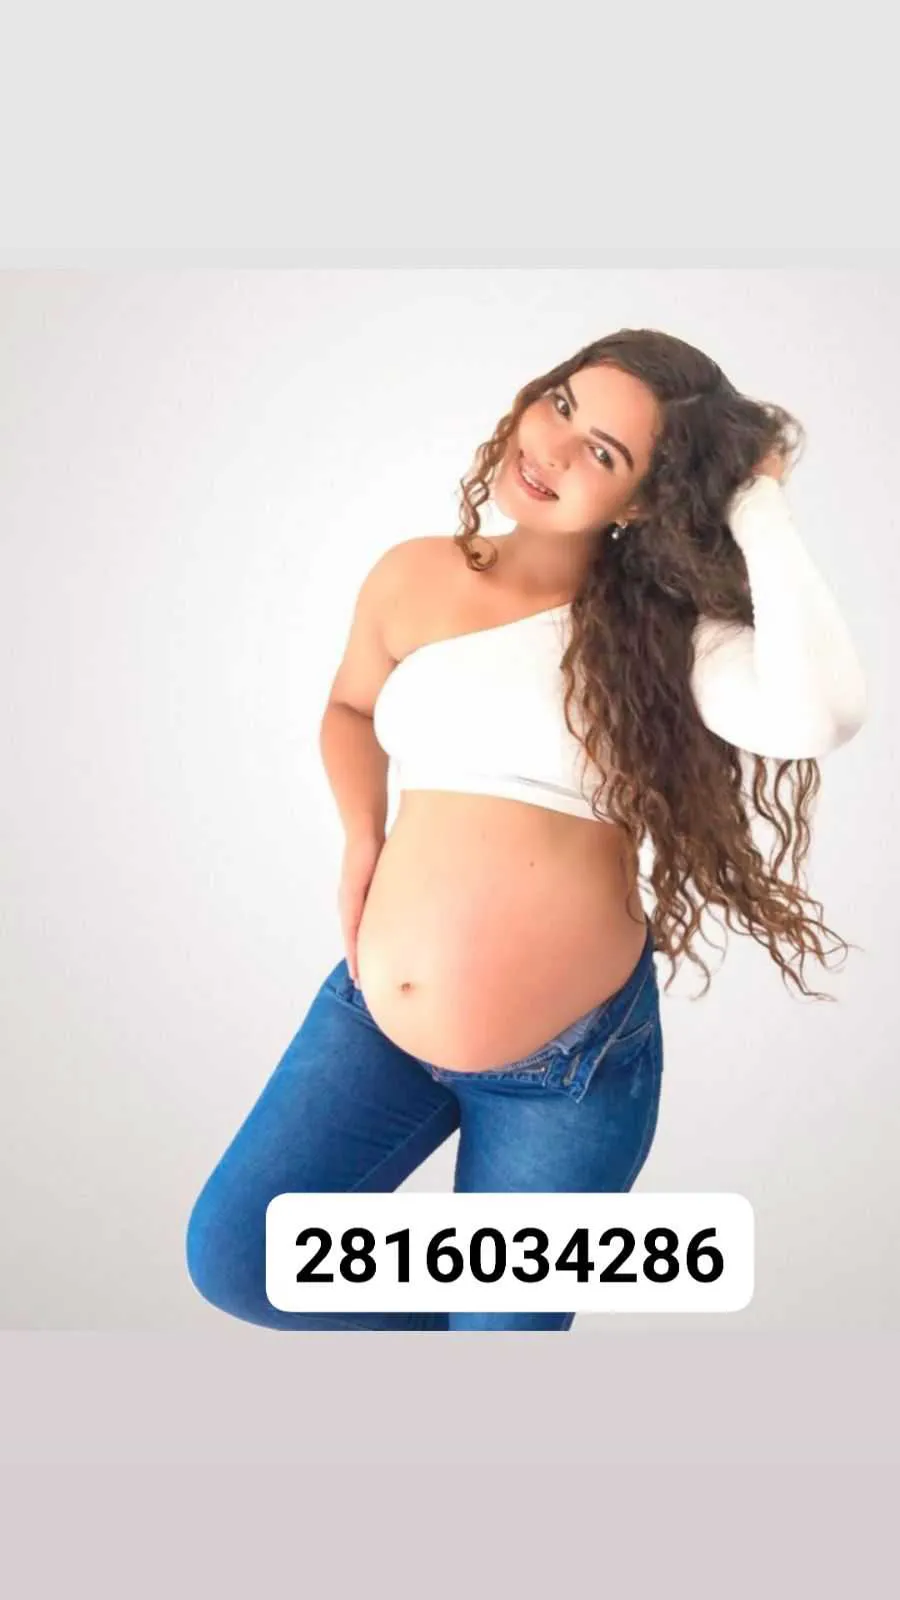 Reviews about escort with phone number 2816034286